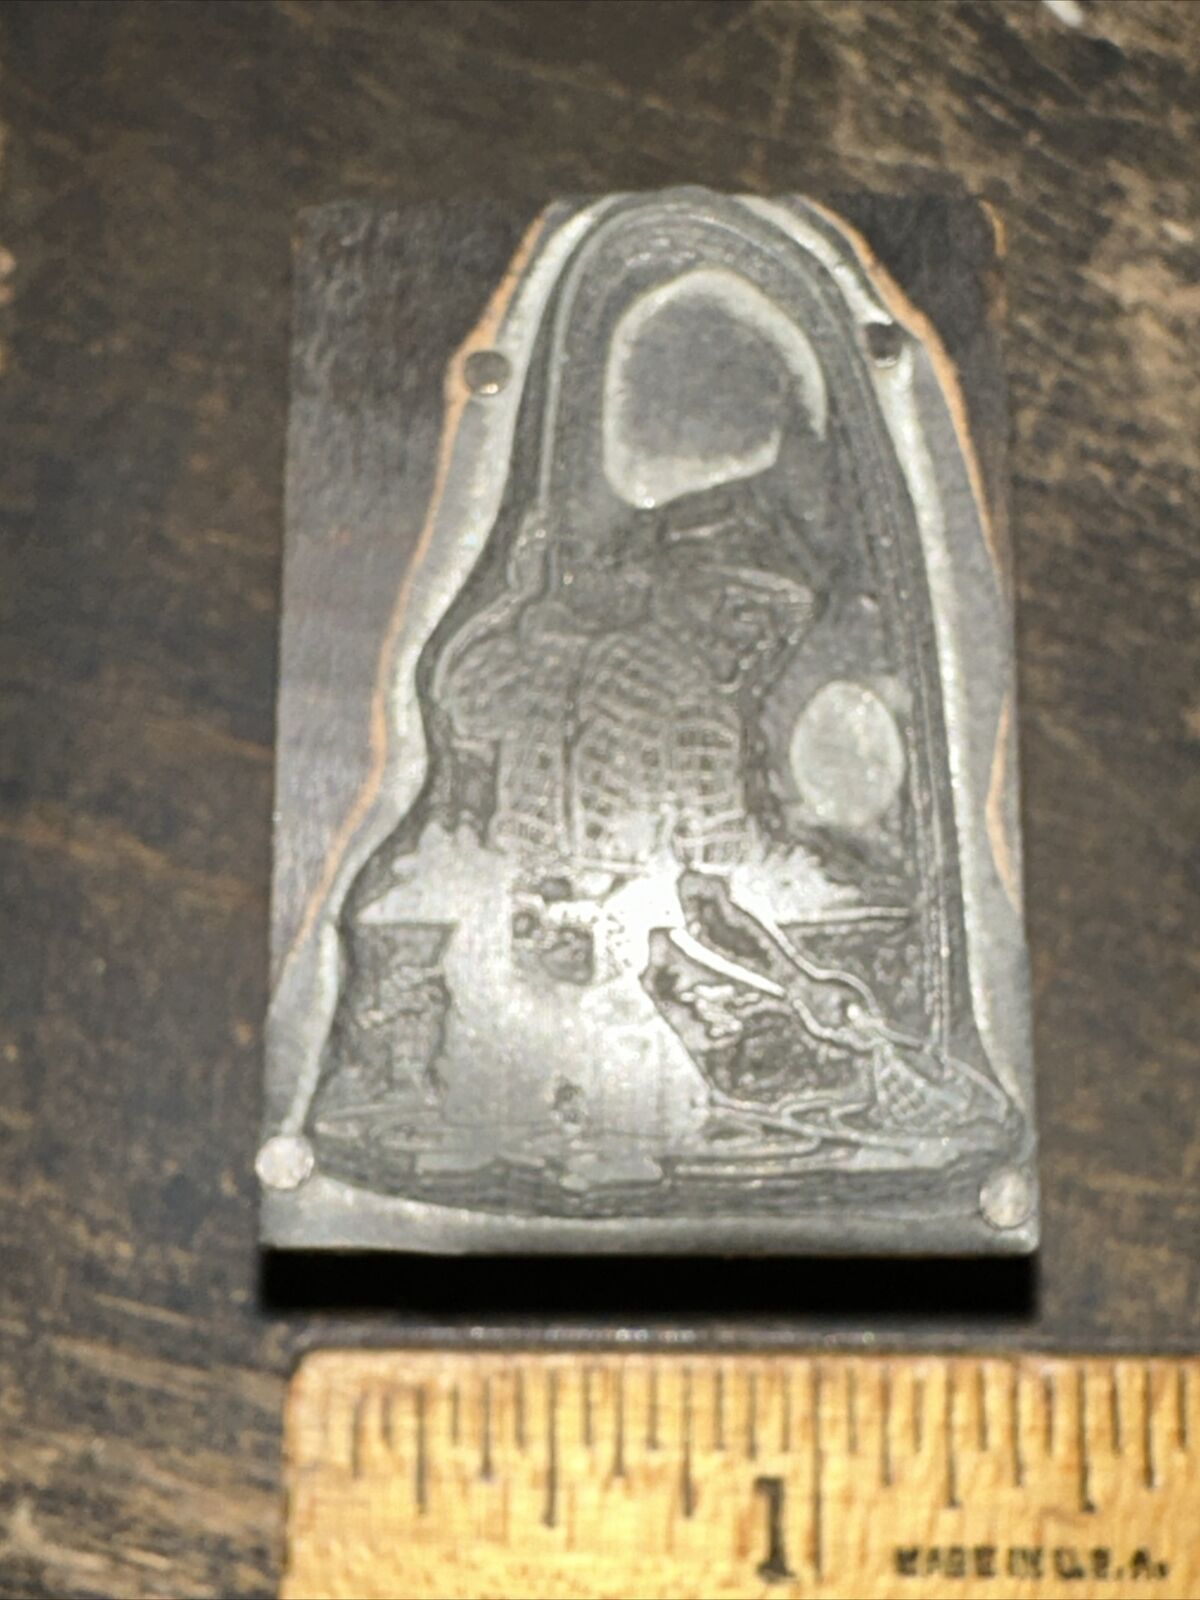 (Print Block) “ Man Fly Fishing in A Stream ” Early Printing Block Nice Details